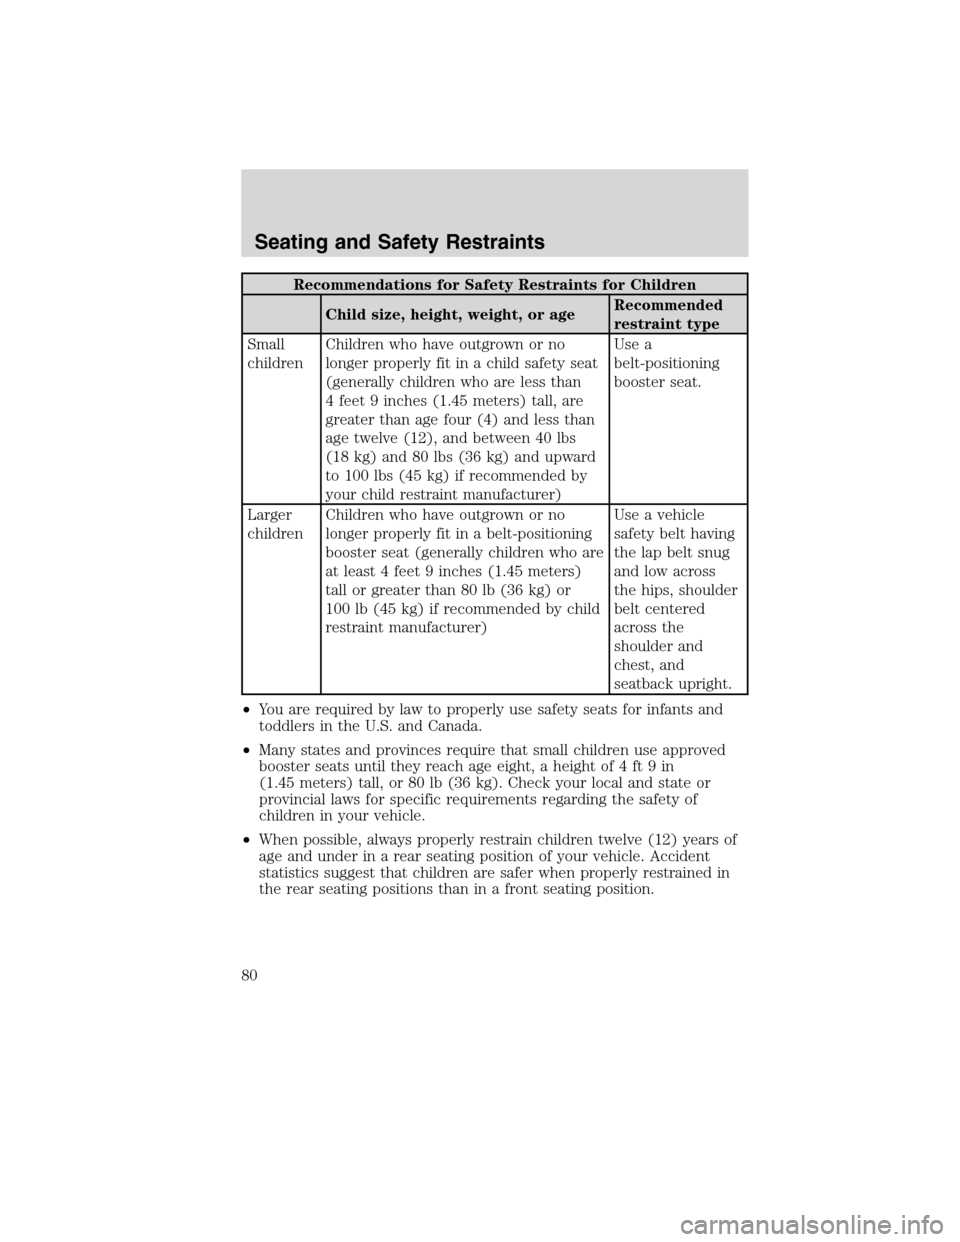 FORD F750 2010 12.G Owners Manual Recommendations for Safety Restraints for Children
Child size, height, weight, or ageRecommended
restraint type
Small
childrenChildren who have outgrown or no
longer properly fit in a child safety sea